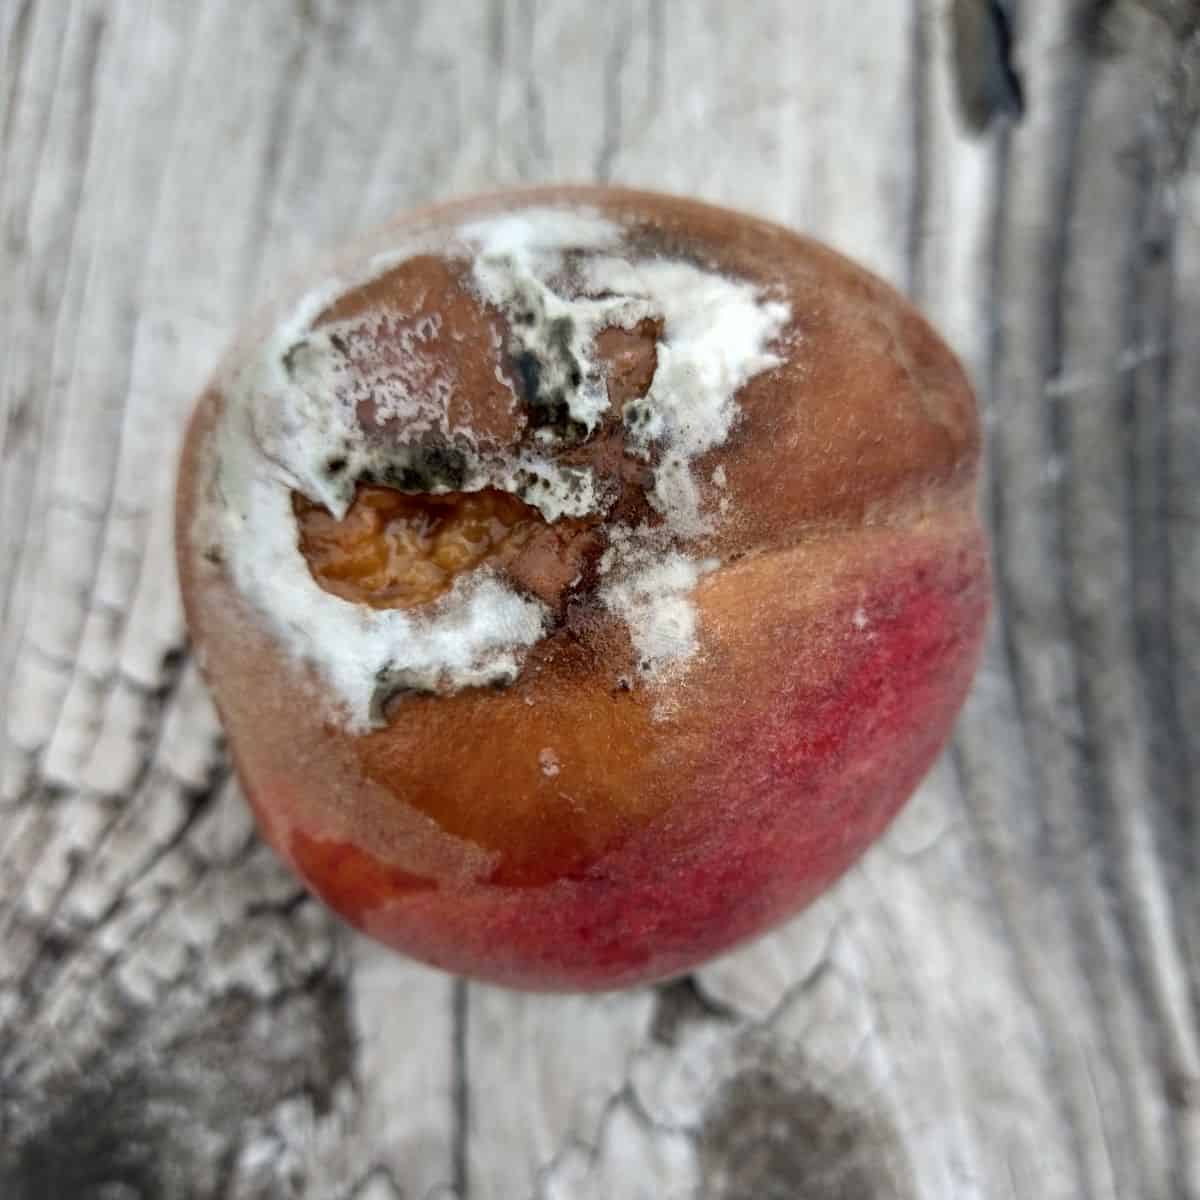 A peach where the bottom half of it is shown covered in mold. The peach is on a wood picnic table.